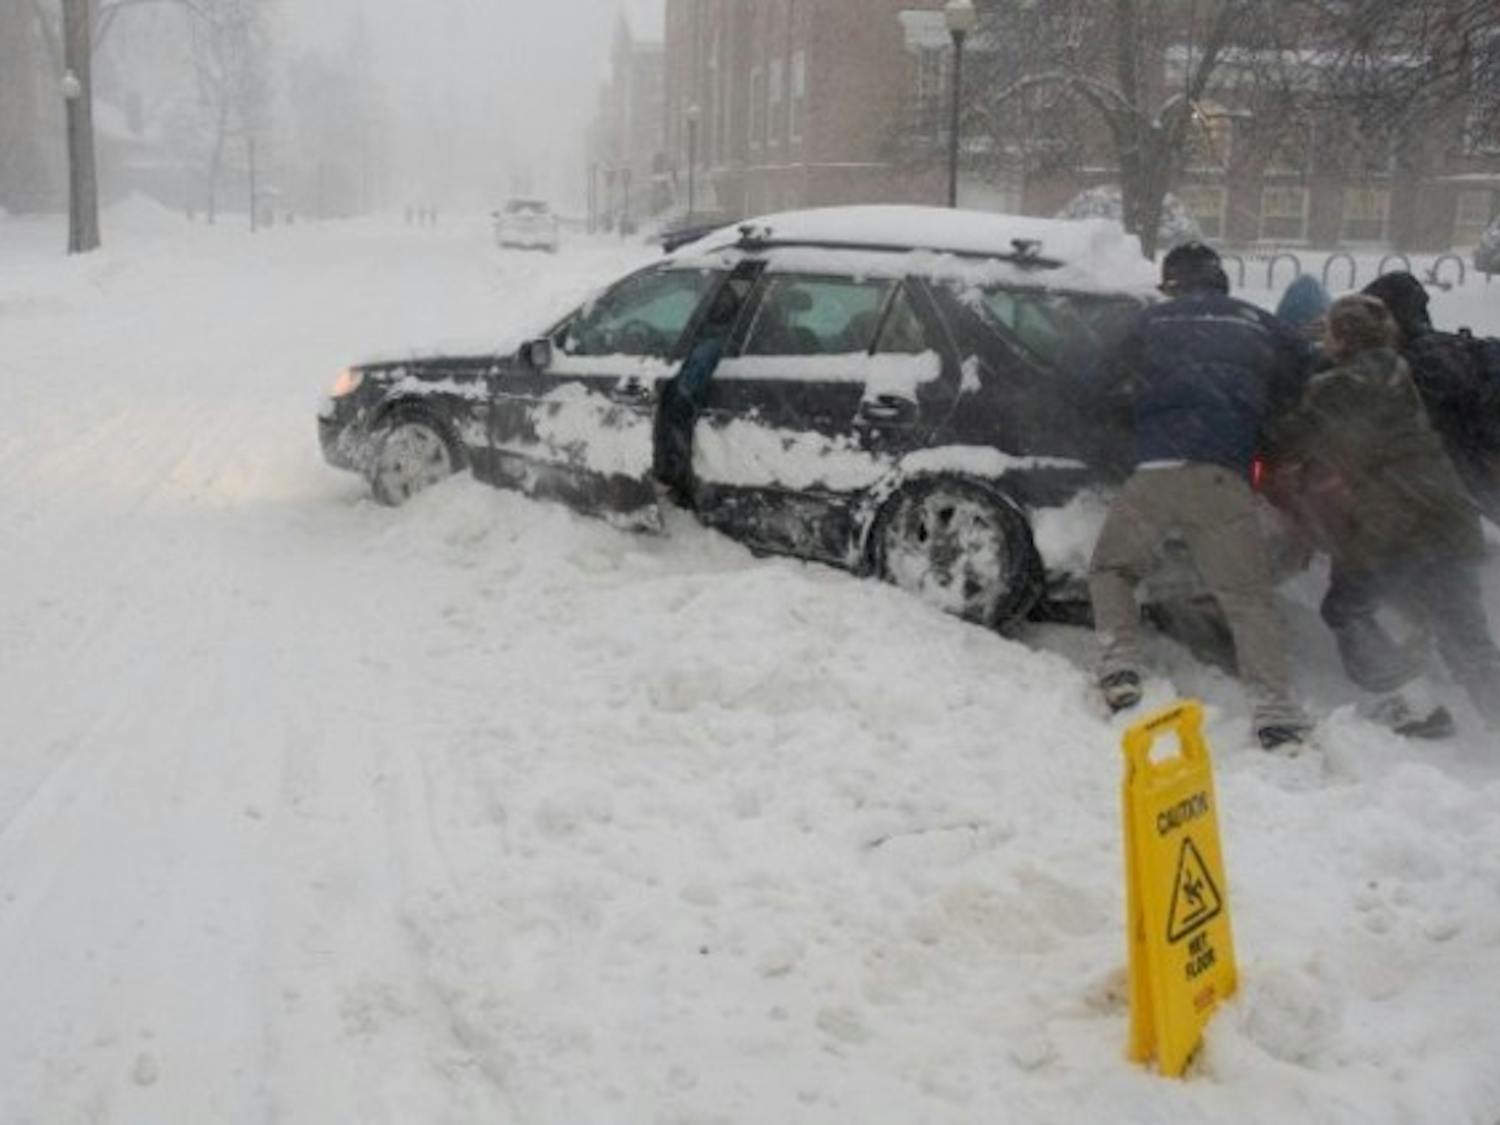 A few undergraduates help a MALS student extract her car from the snowbank. It snowed over a foot Wednesday.